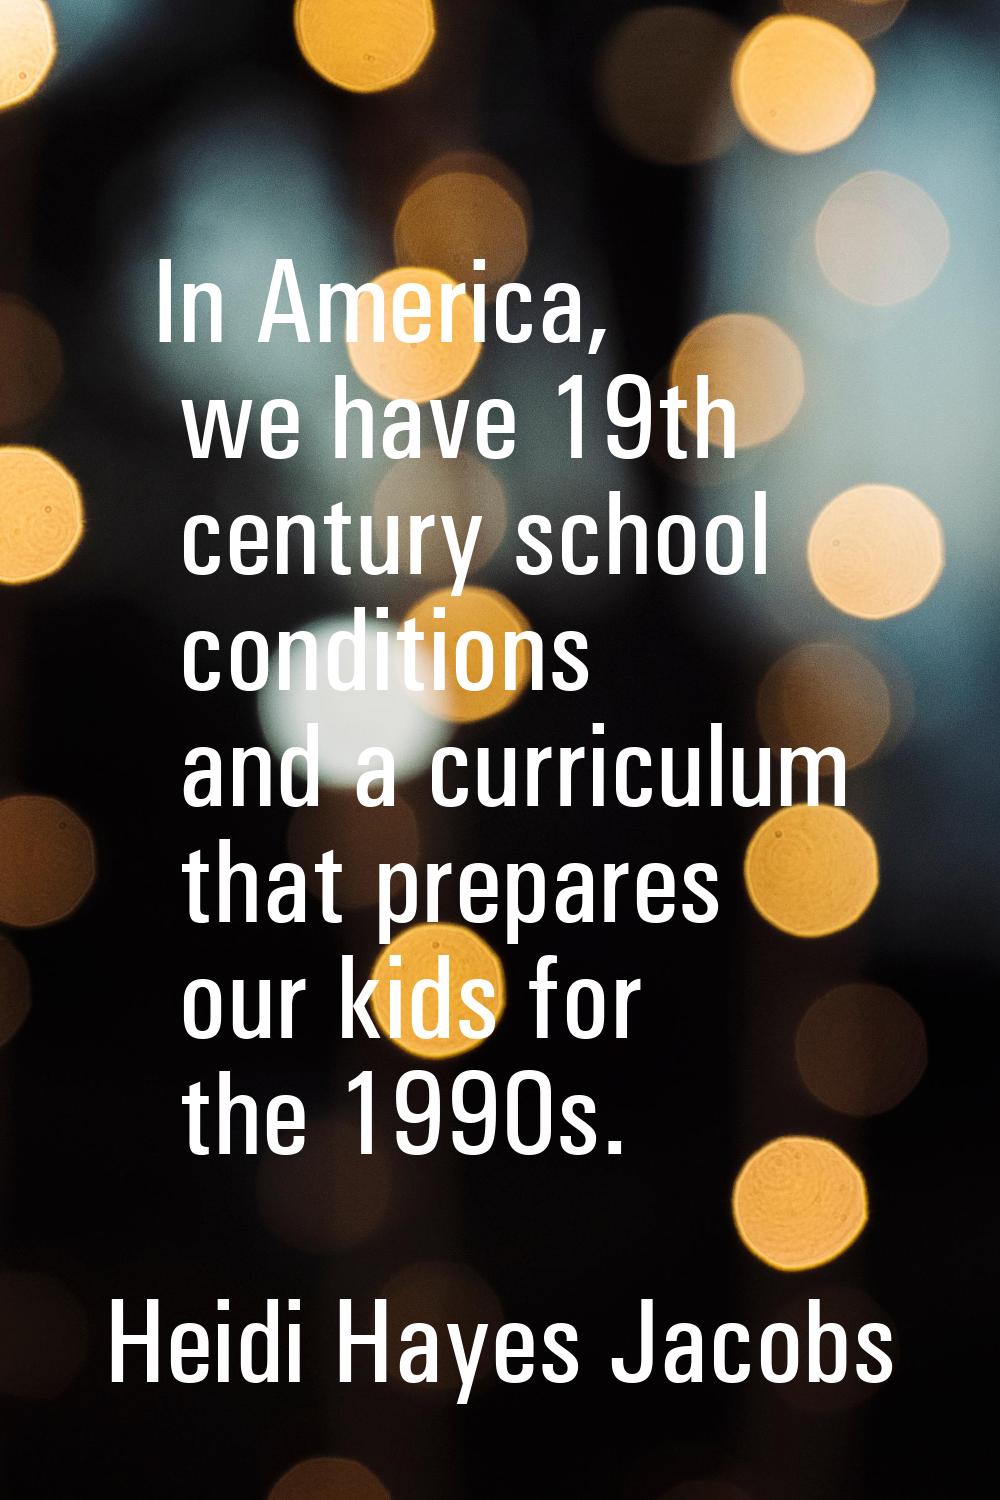 In America, we have 19th century school conditions and a curriculum that prepares our kids for the 